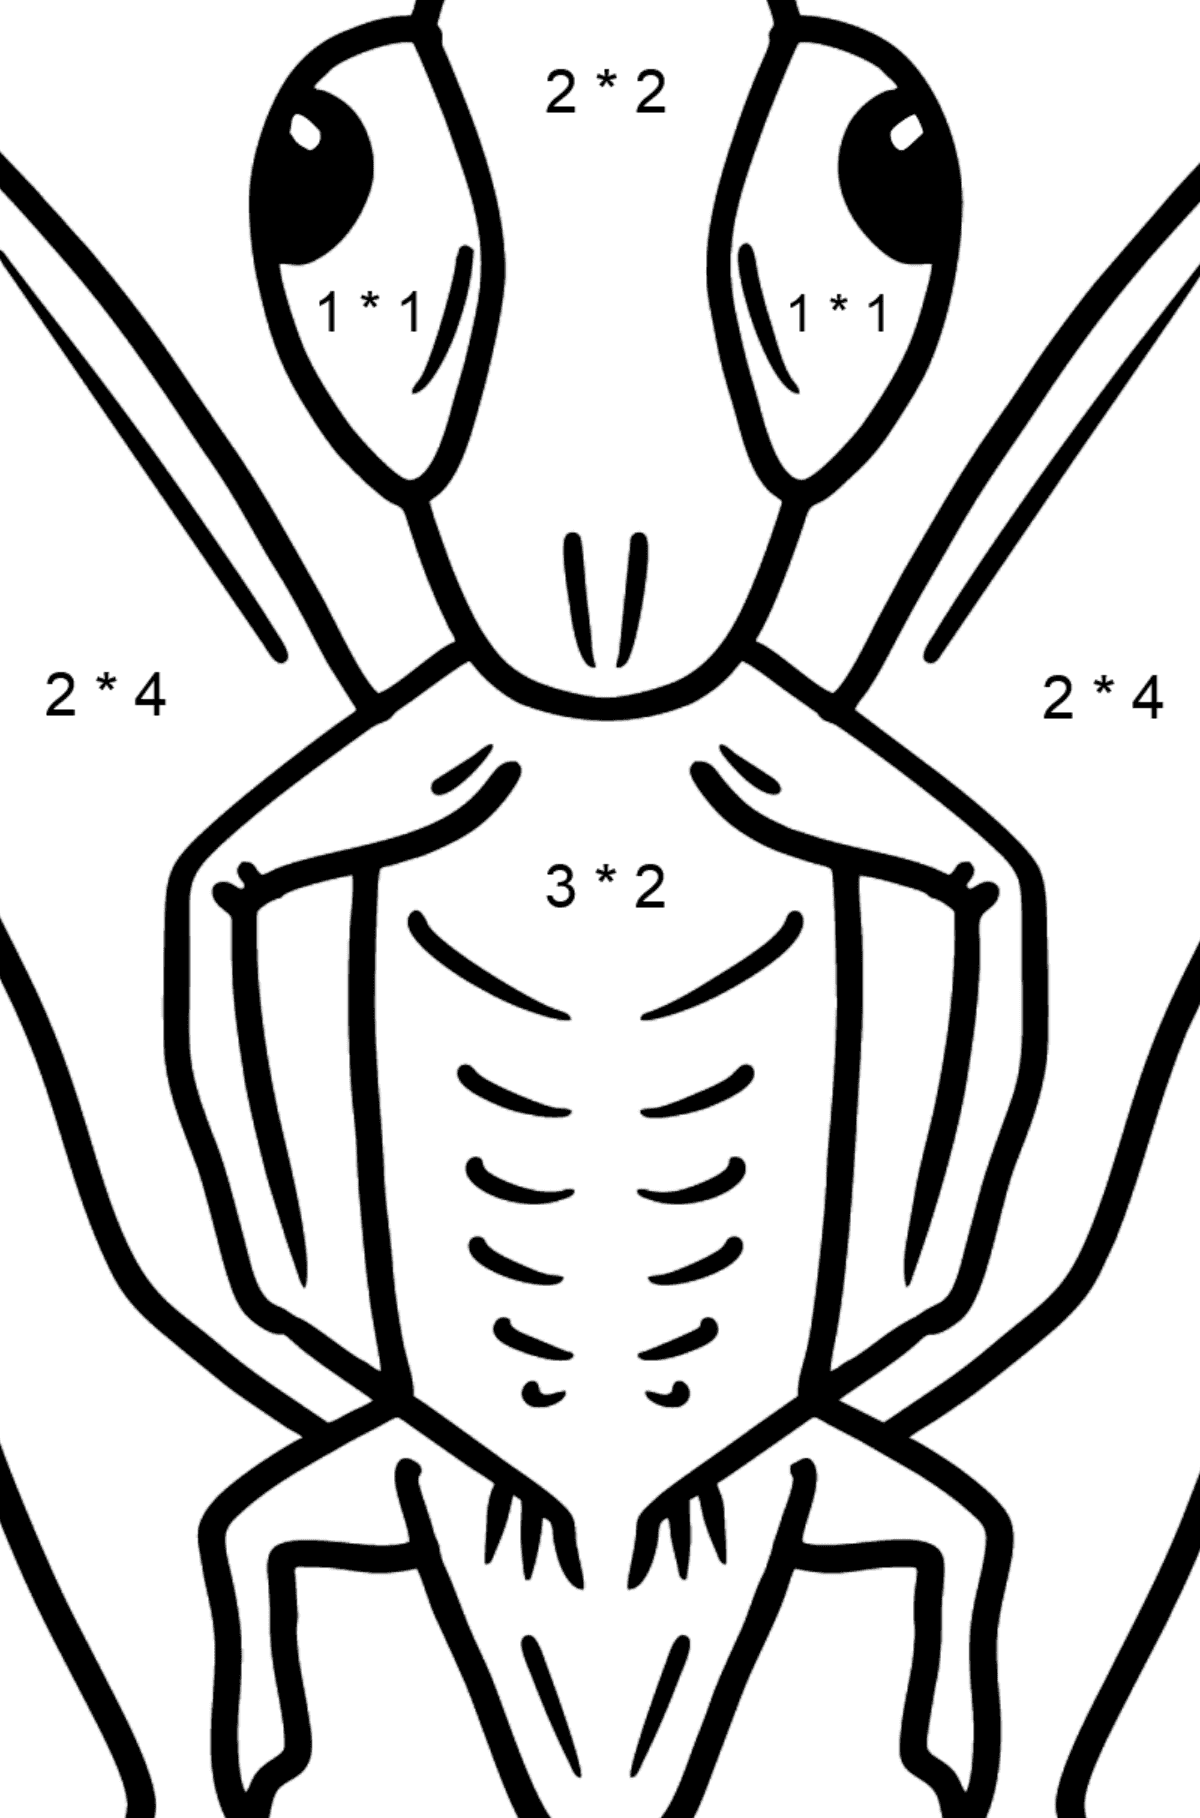 Grasshopper coloring page - Math Coloring - Multiplication for Kids